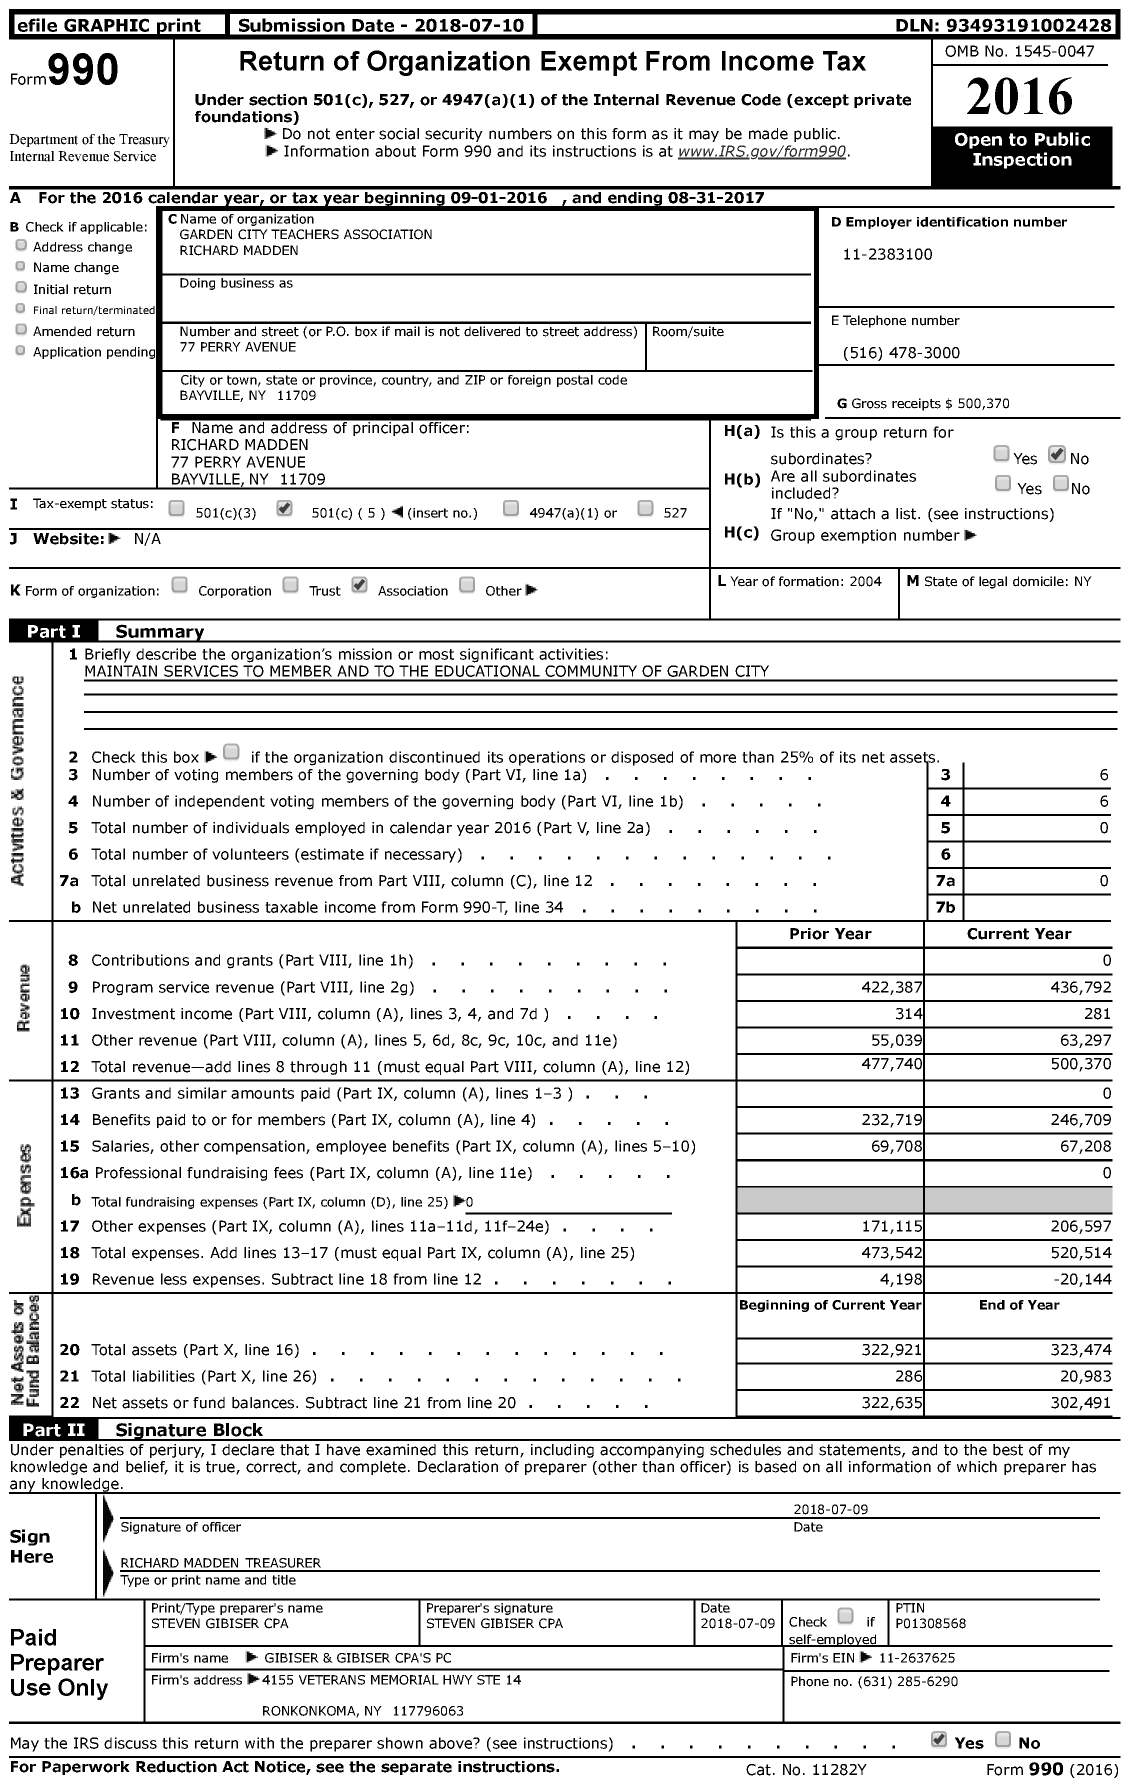 Image of first page of 2016 Form 990 for American Federation of Teachers - 2666 Garden City Teachers Assoc